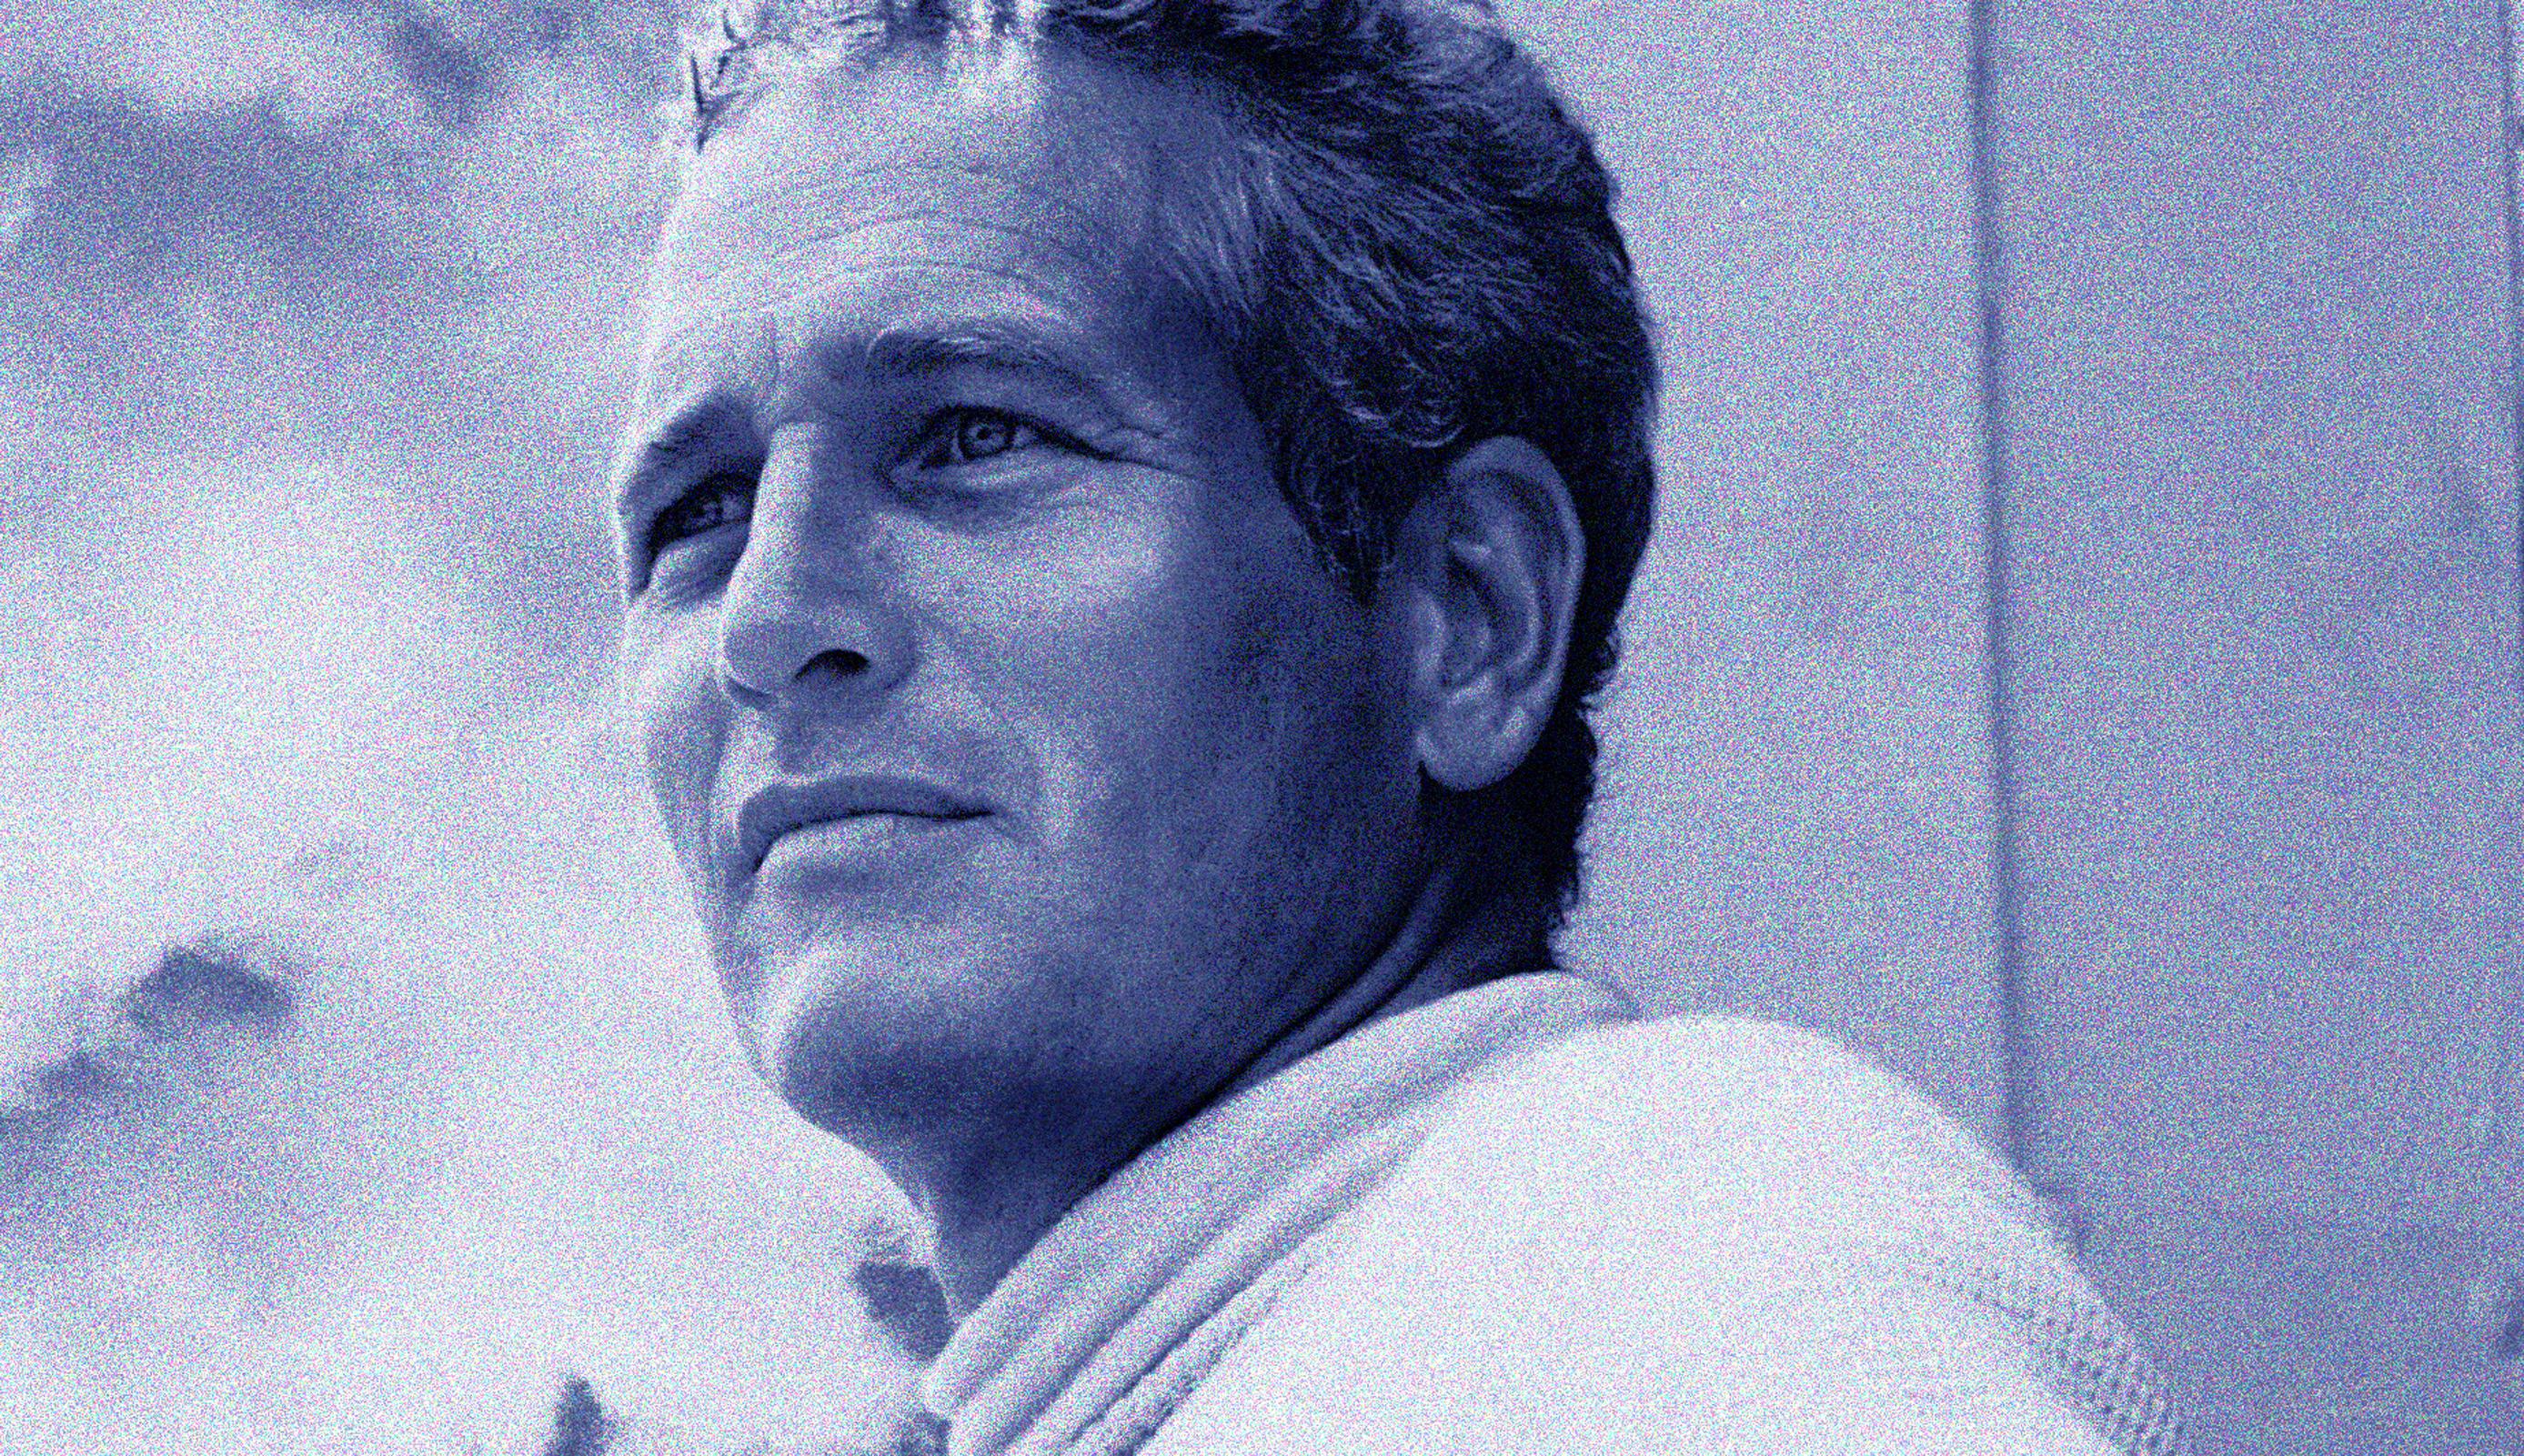 Gary Bernstein Portrait Photograph - Paul Newman 1 Blue (this is a large print on canvas; see smaller sizes below)